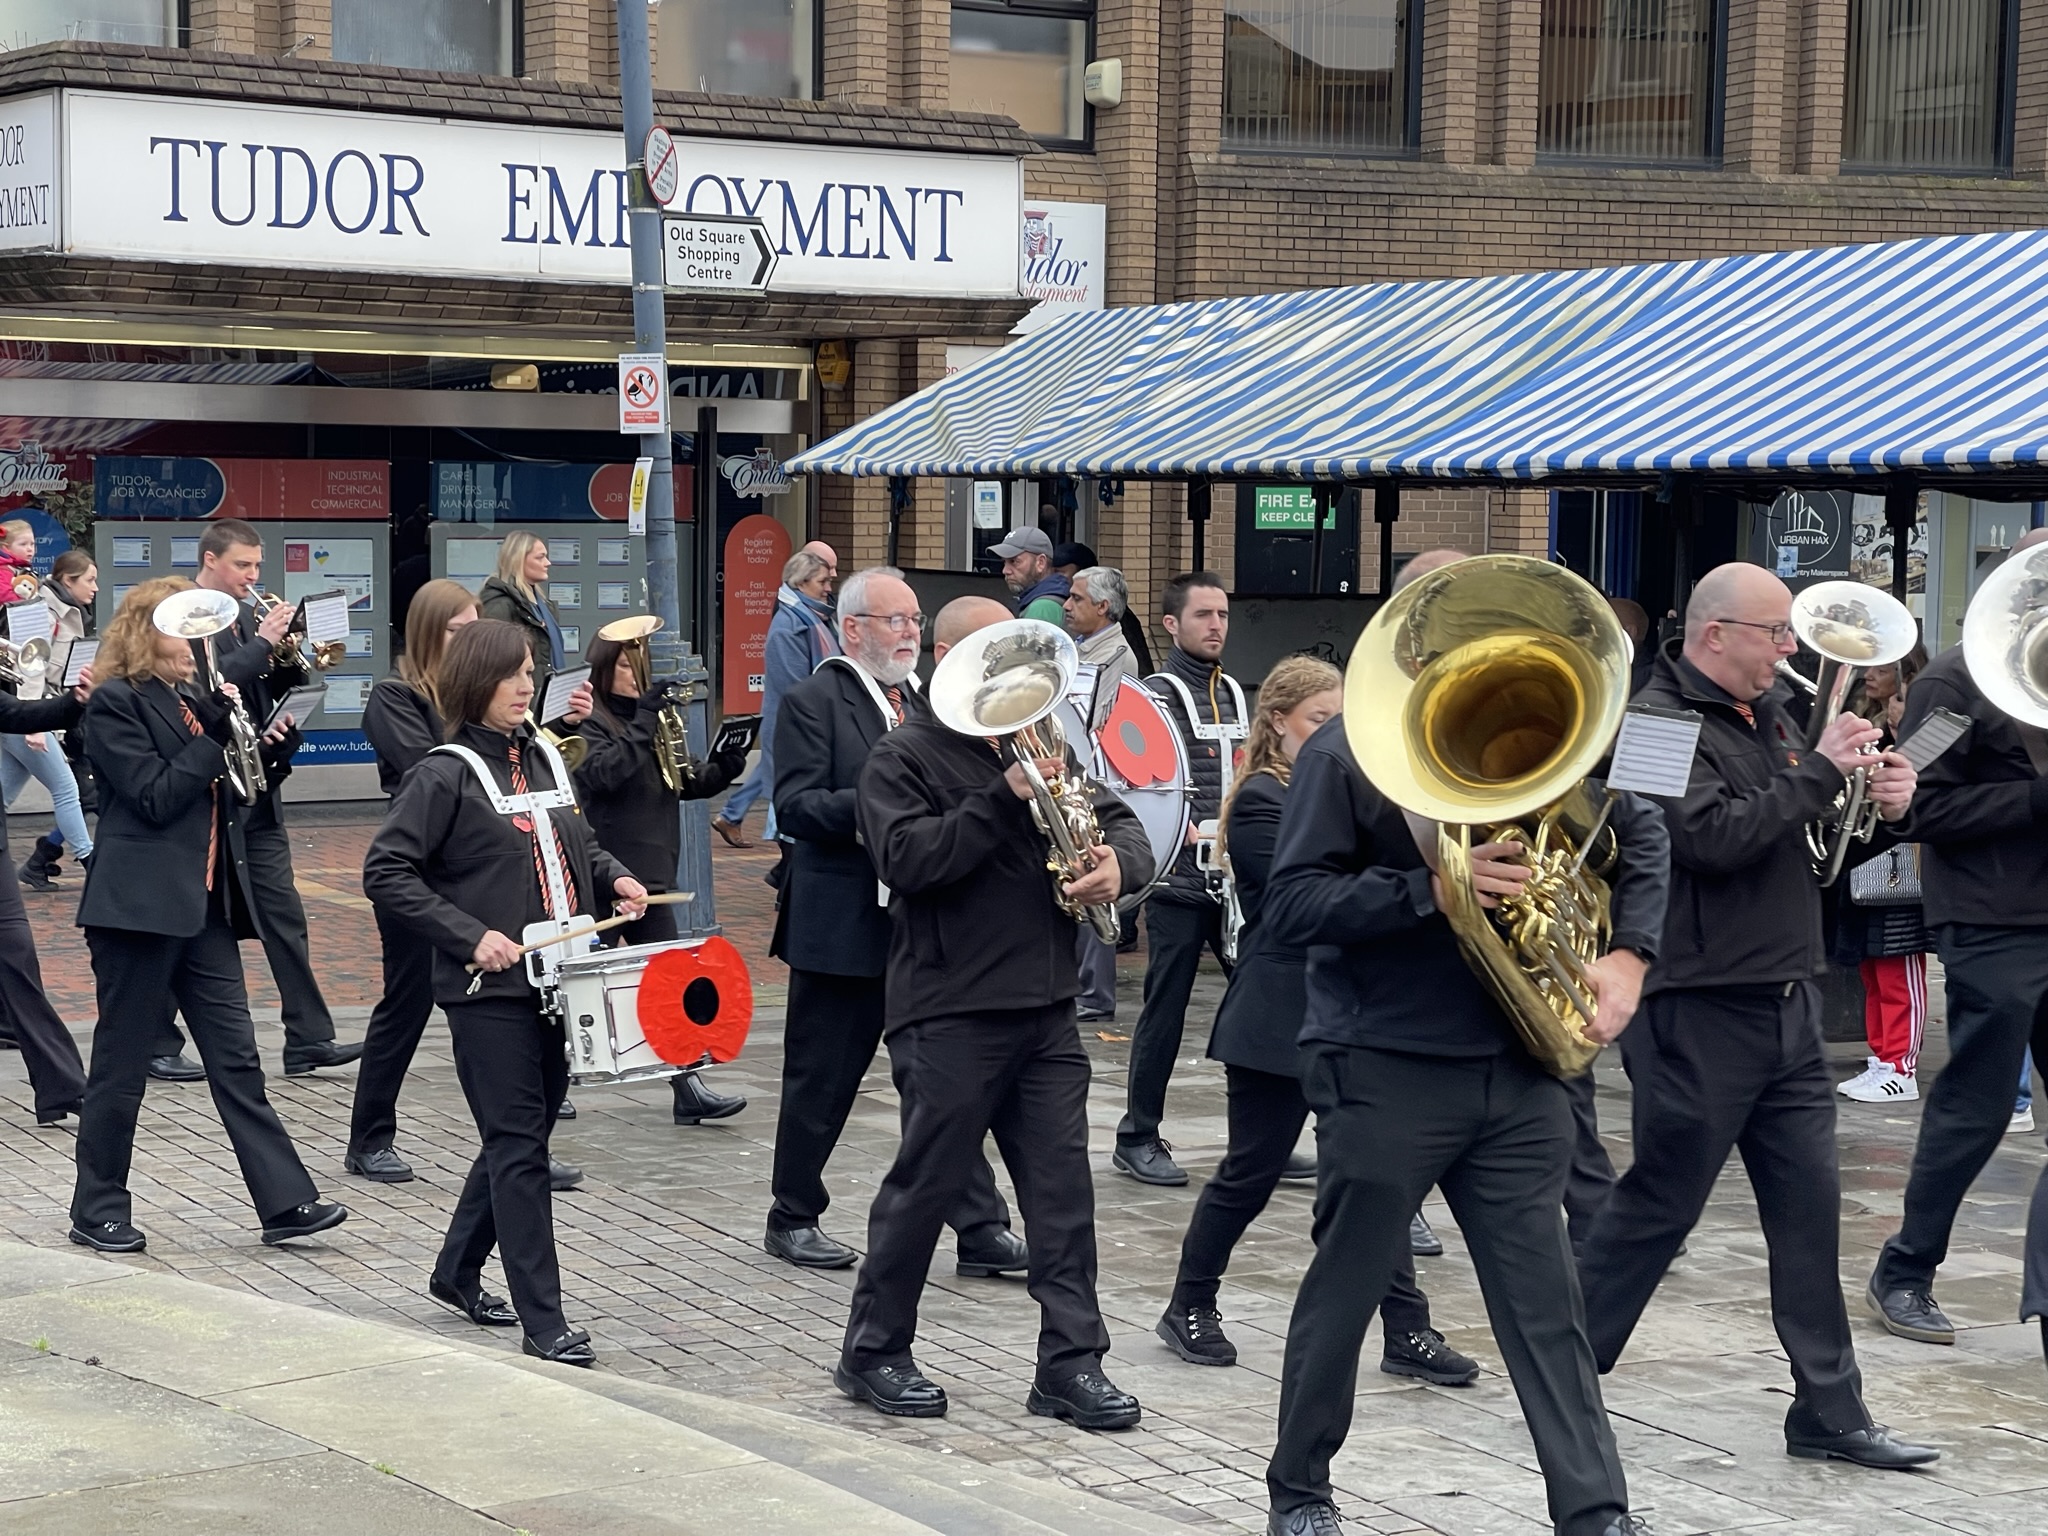 Members of the Staffordshire Band